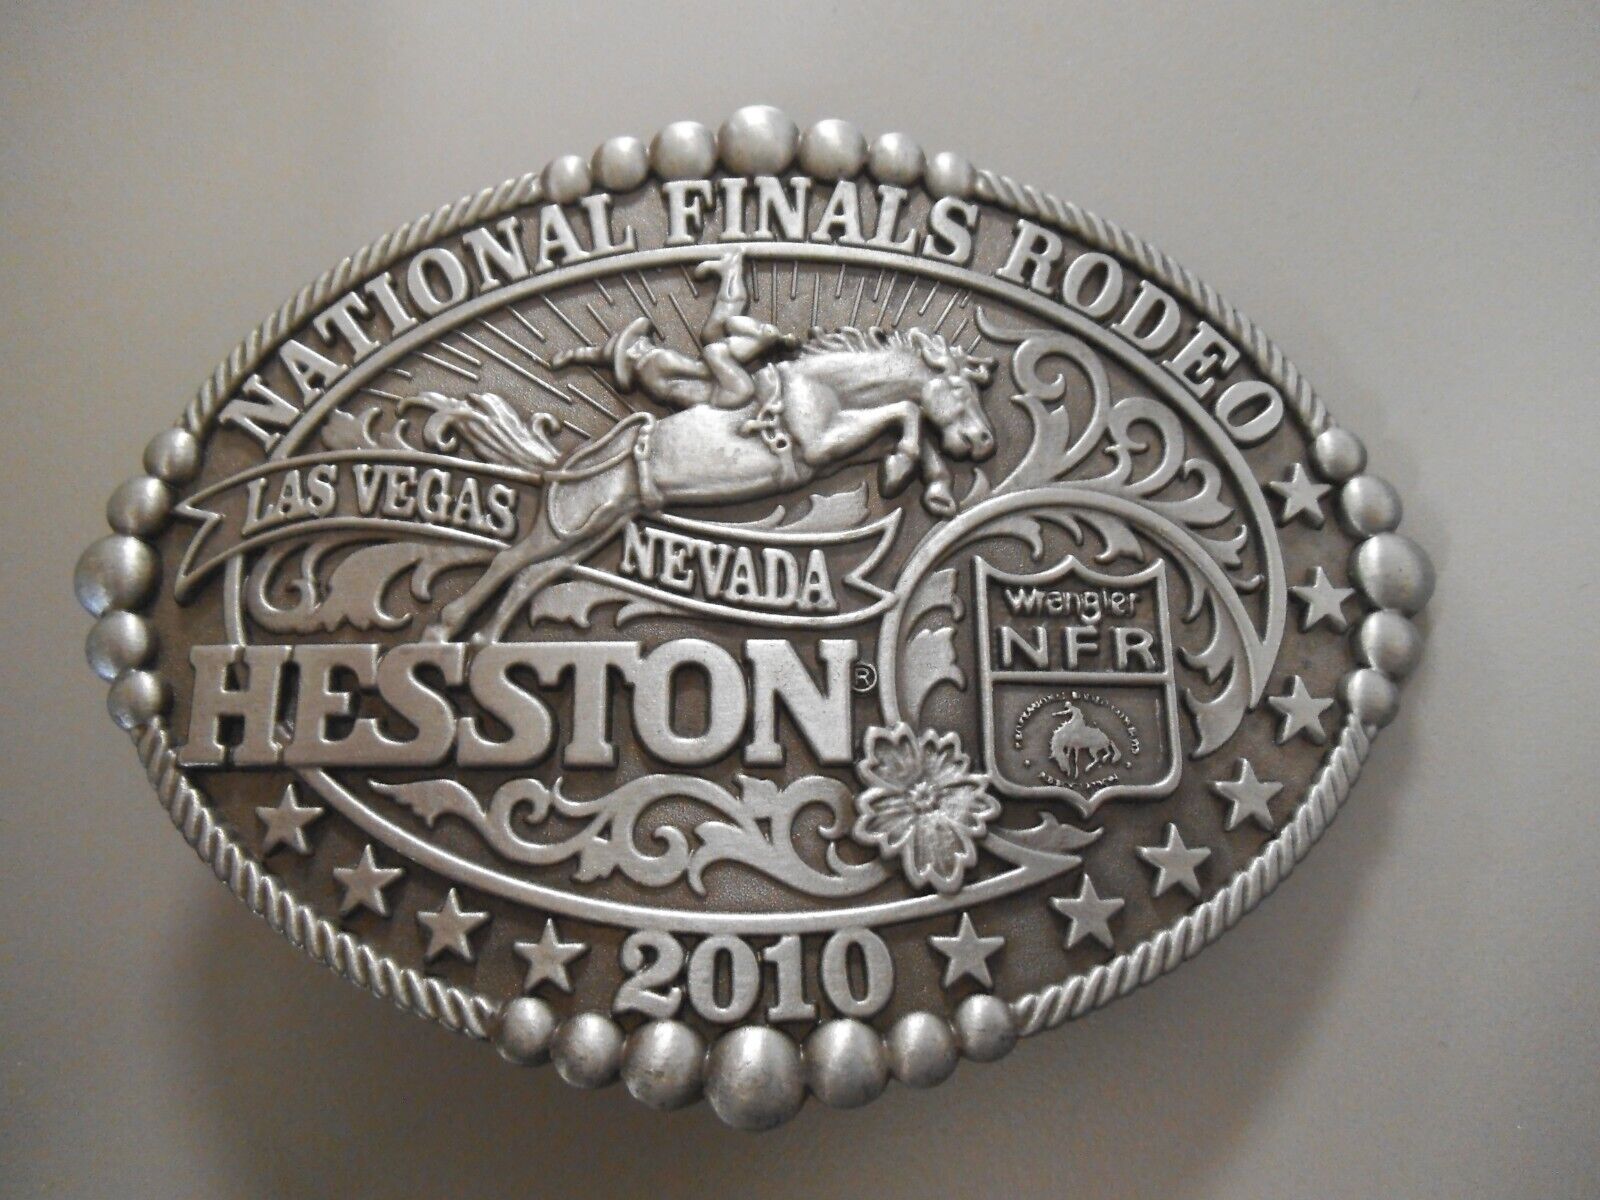 Hesston National Final Rodeo 2010 belt buckle youth size